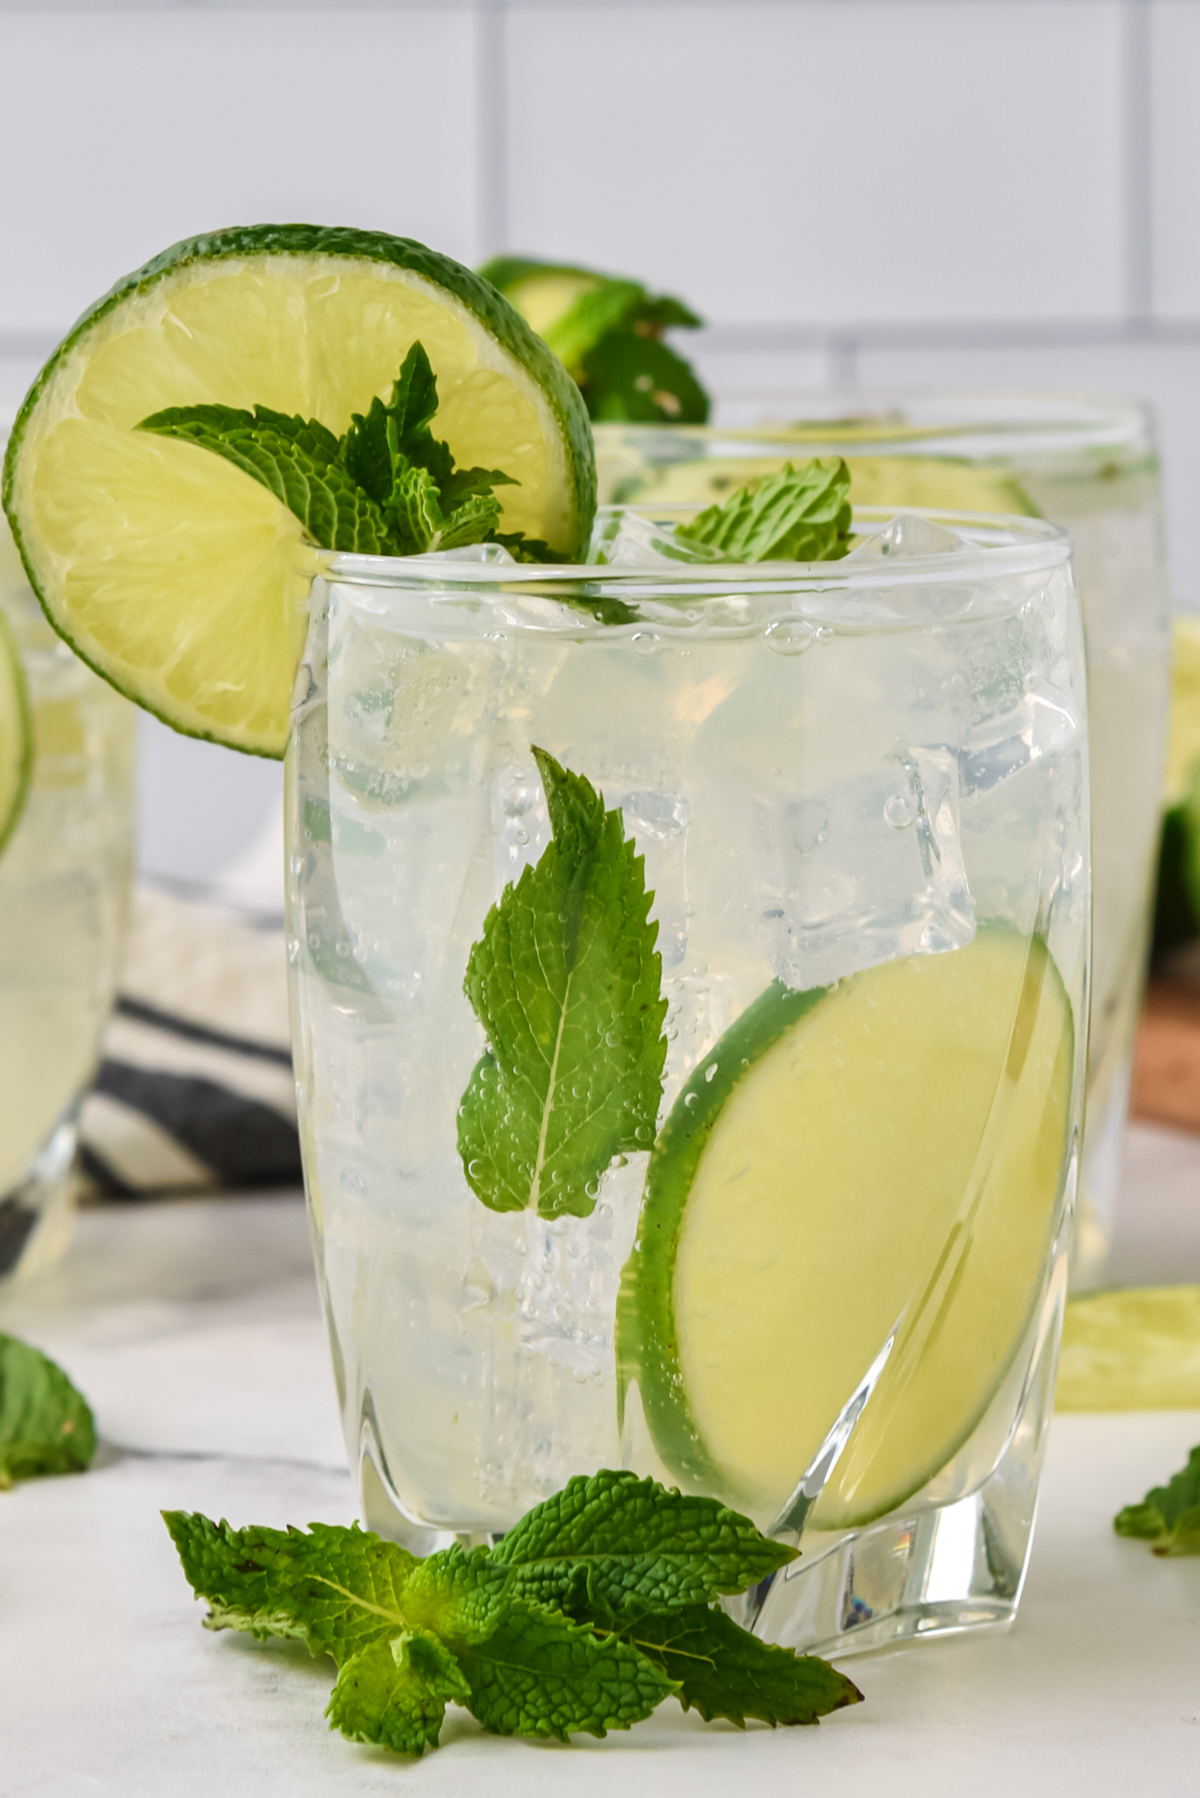 This recipe for Classic Mojitos will make you feel like you’re on vacation! Made with fresh mint leaves and a homemade lime simple syrup, this sweet rum cocktail will perk you up on warm summer days! via @foodhussy